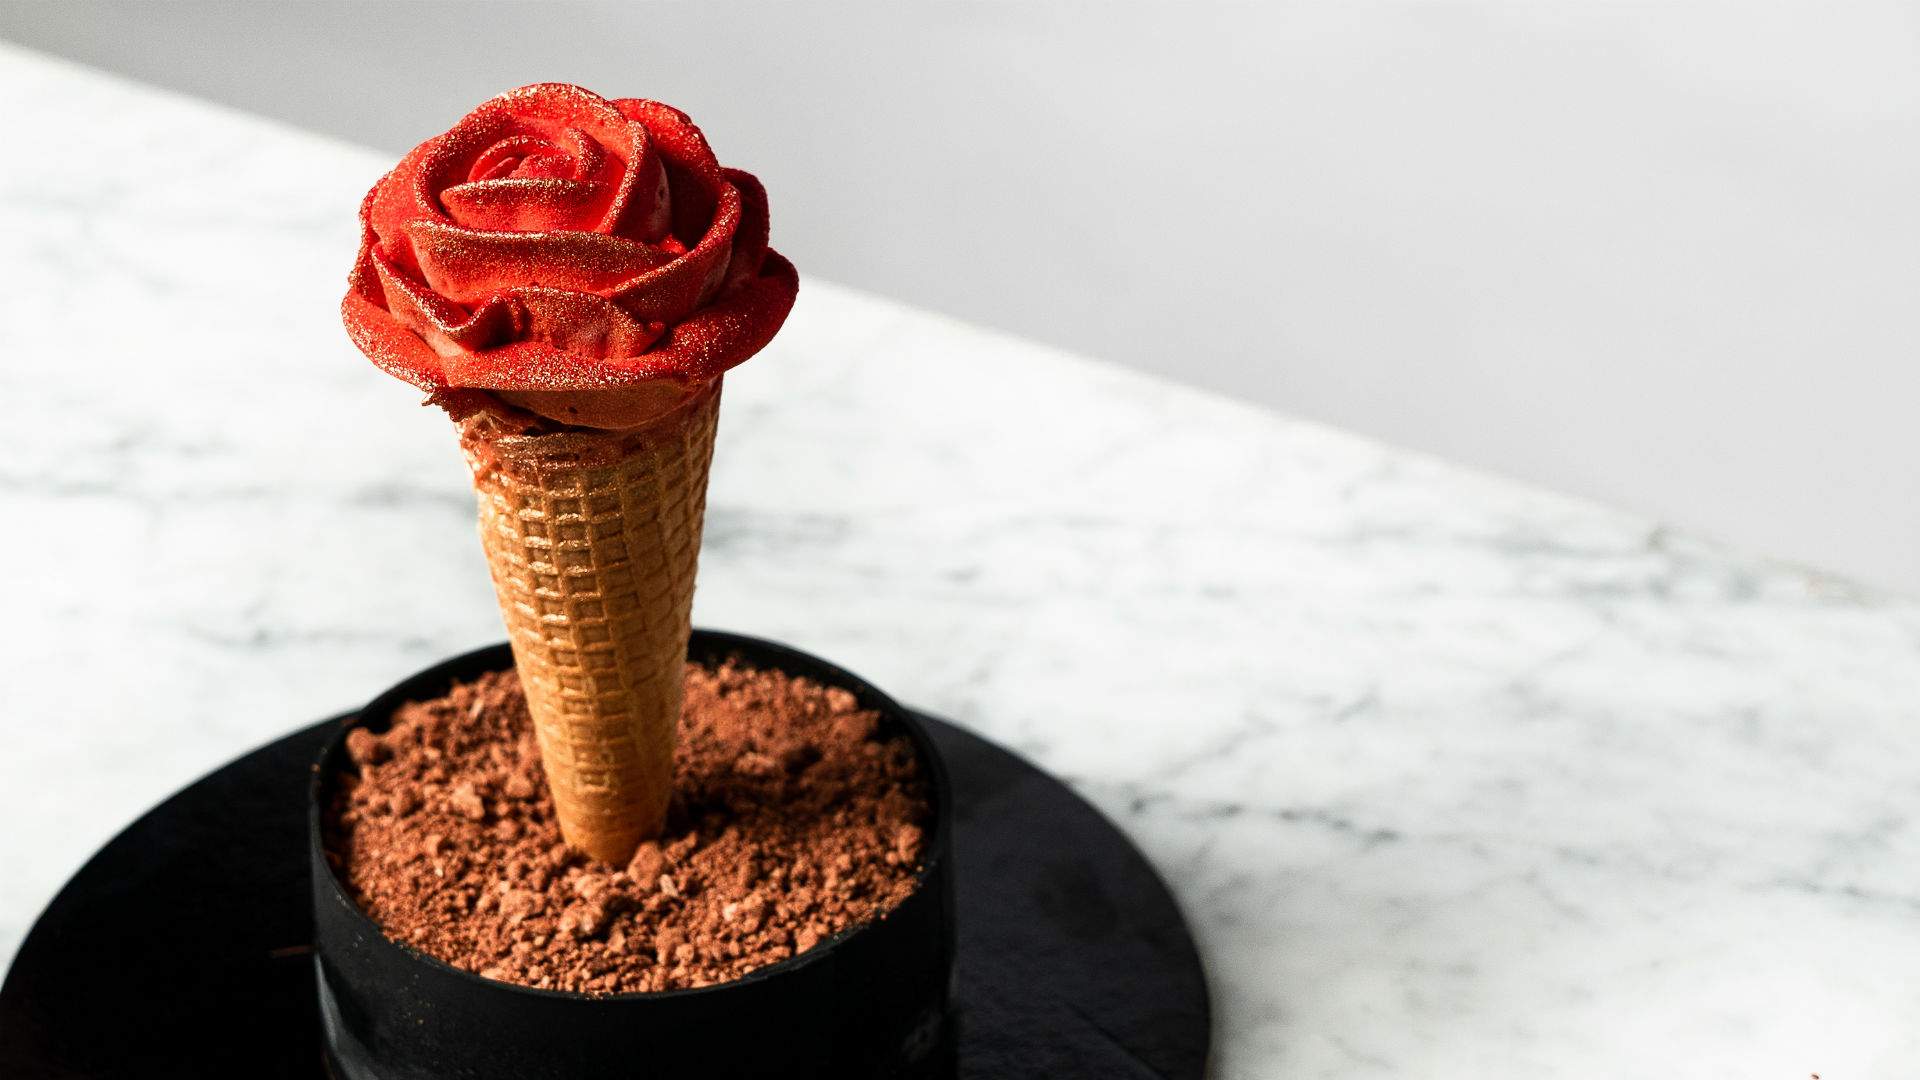 Messina Has Created an OTT Gelato Rose If You Prefer Your Flowers Edible